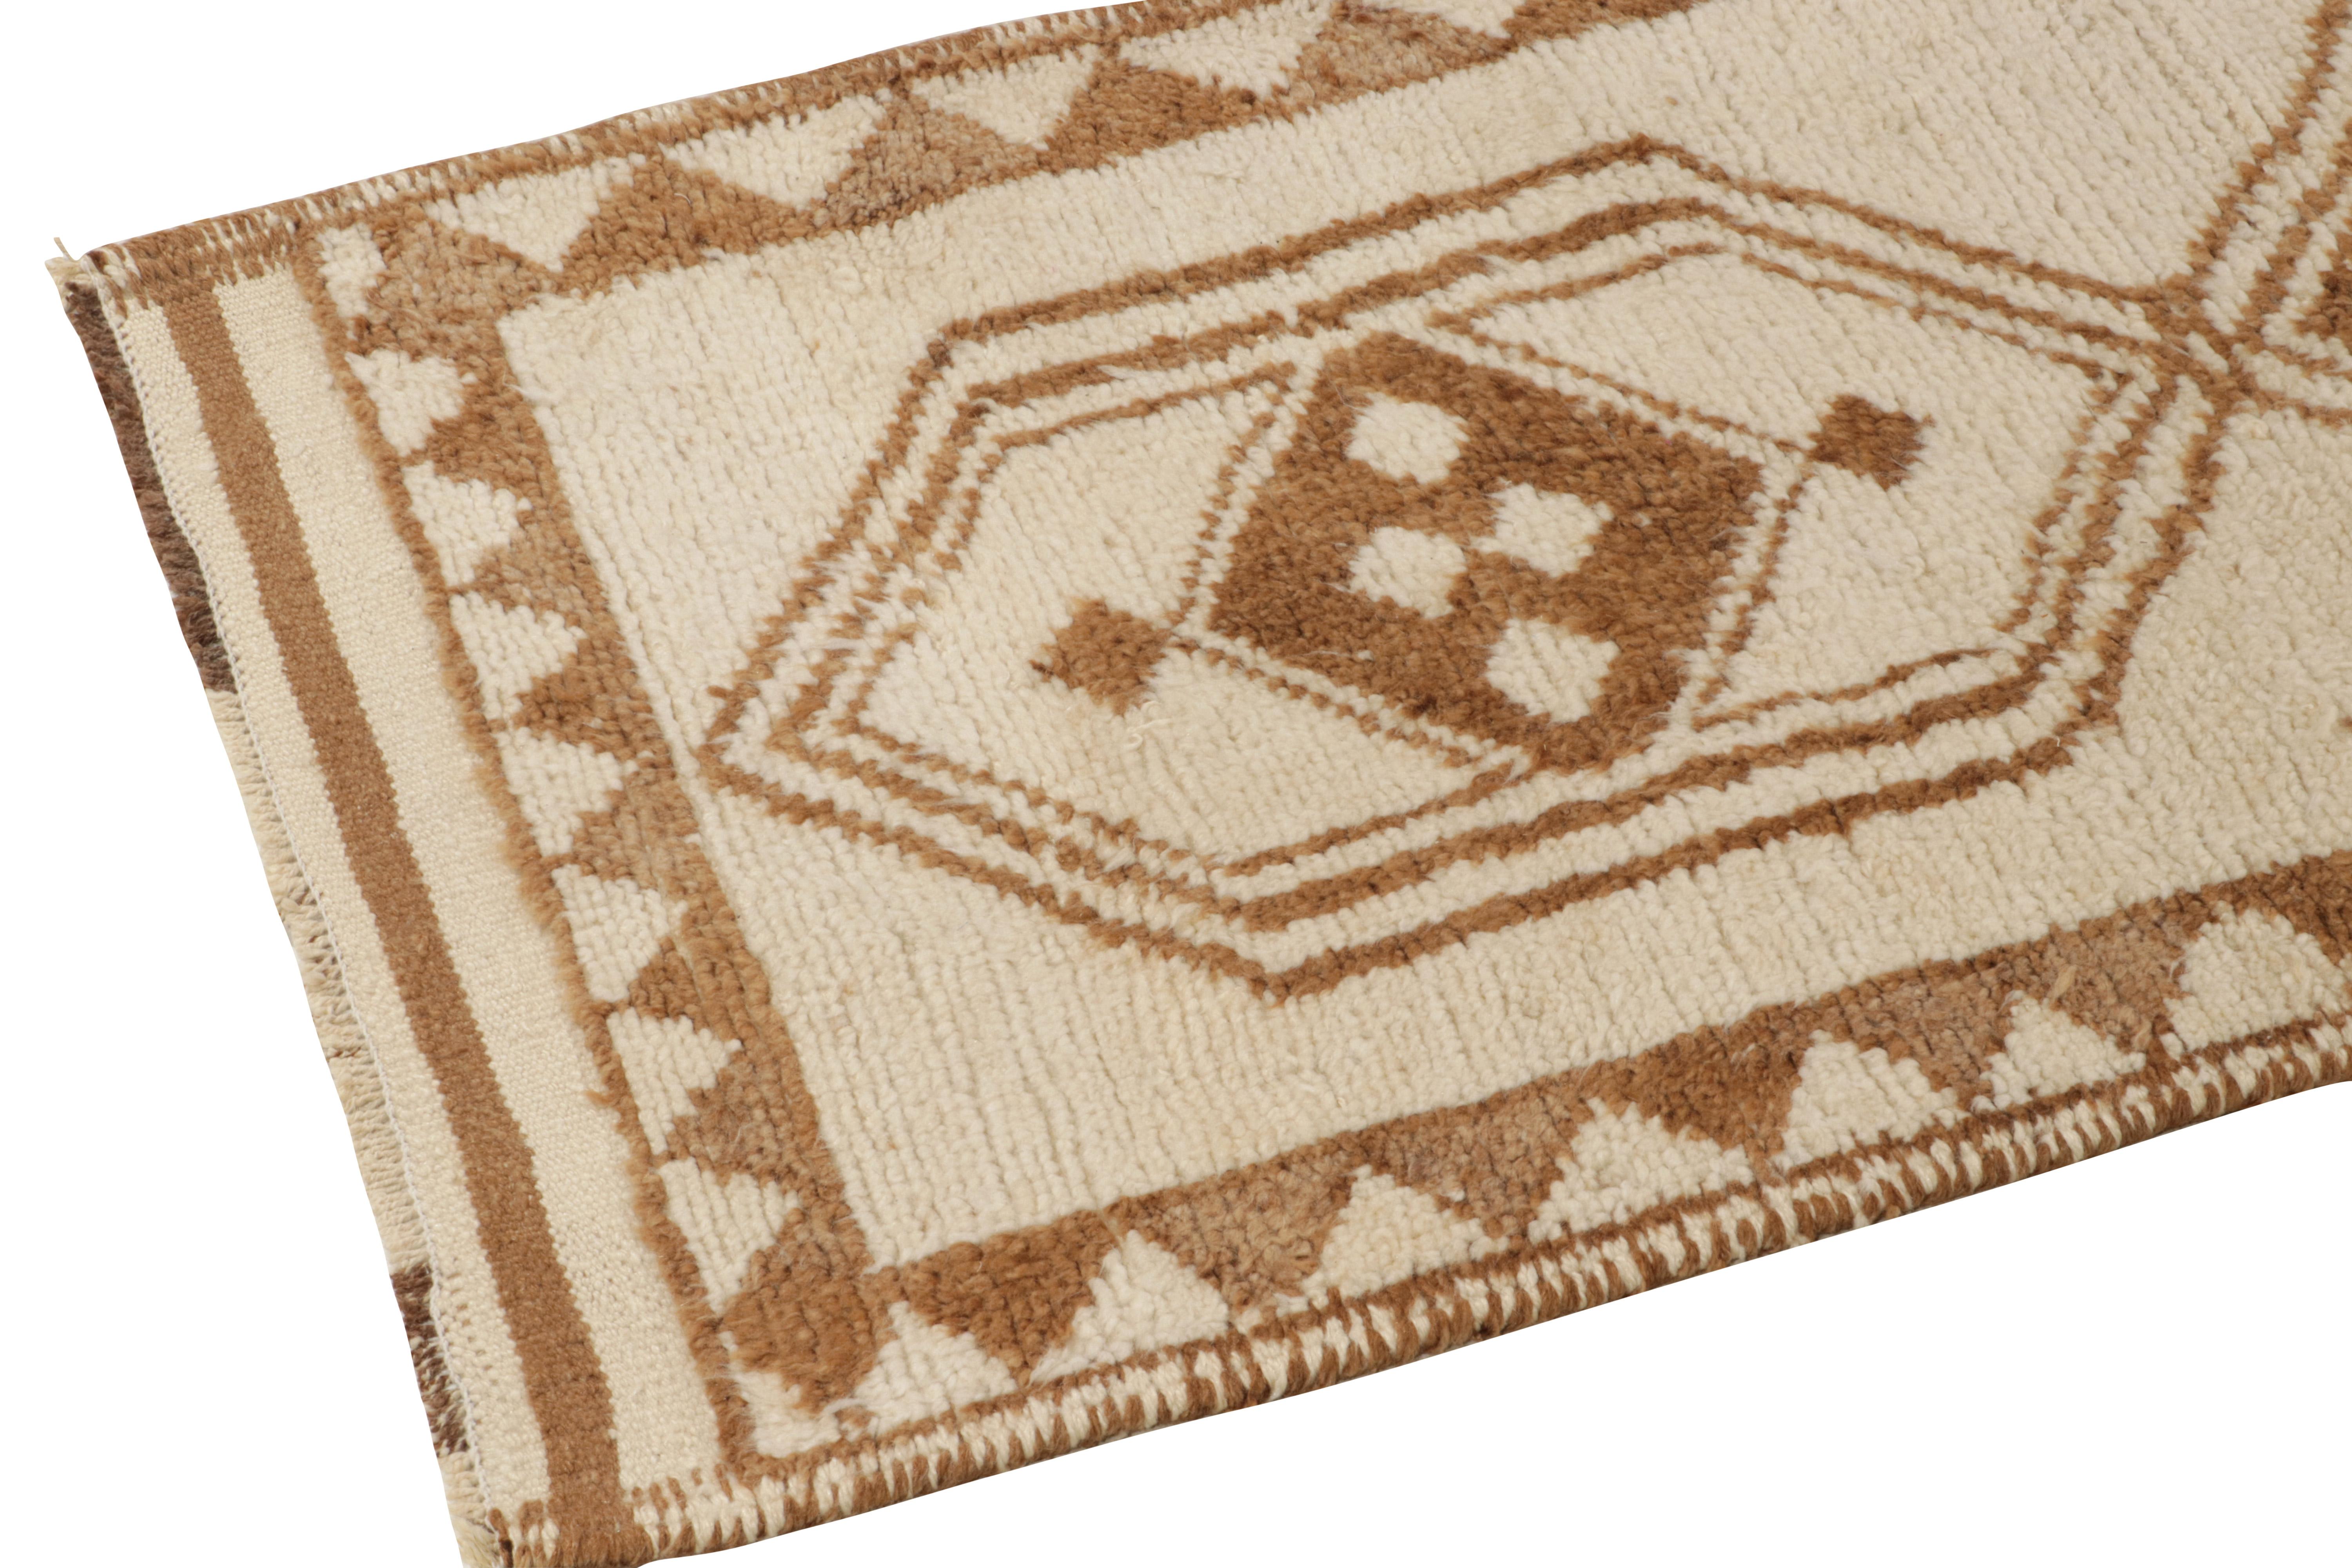 Hand-Knotted Vintage Tribal Runner in Off-White Beige-Brown Medallion Patterns by Rug & Kilim For Sale